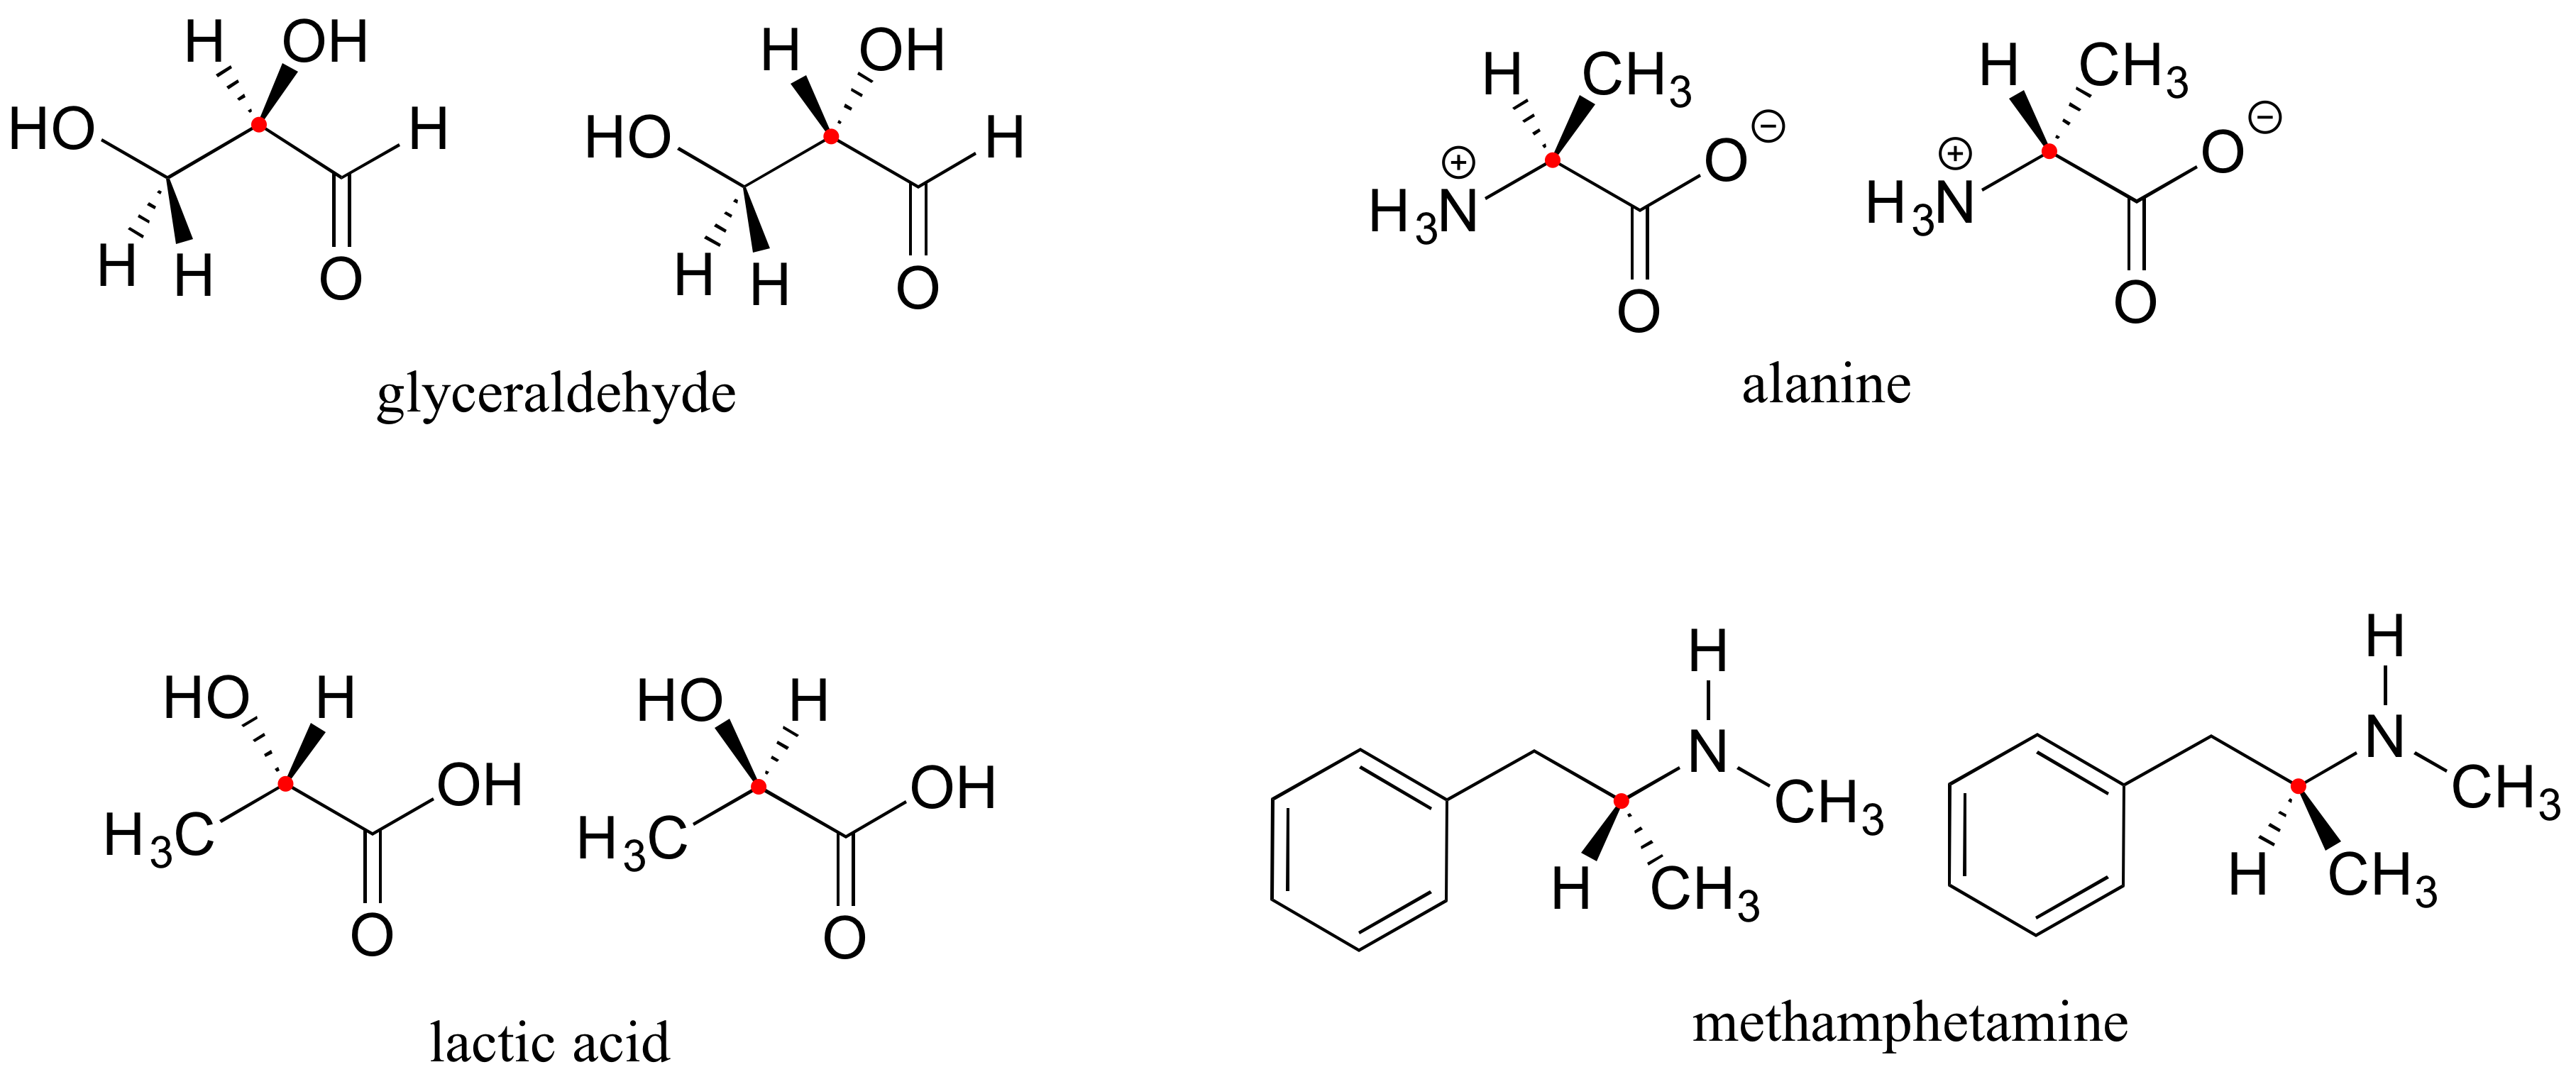 Glyceraldehyde, alanine, lactic acid and methamphetamine are each shown as a pair of enantiomers. In each case a chiral carbon is marked with a red dot. Each structure has 2 of 4 connecting groups to this carbon drawn in the plane of the paper, and one group drawn in front of the plane, another drawn behind. The pairs of structures (2 glyceraldehyde structures for example) have these two groups positioned differently. Each pair thus shows a pair of enantiomers.